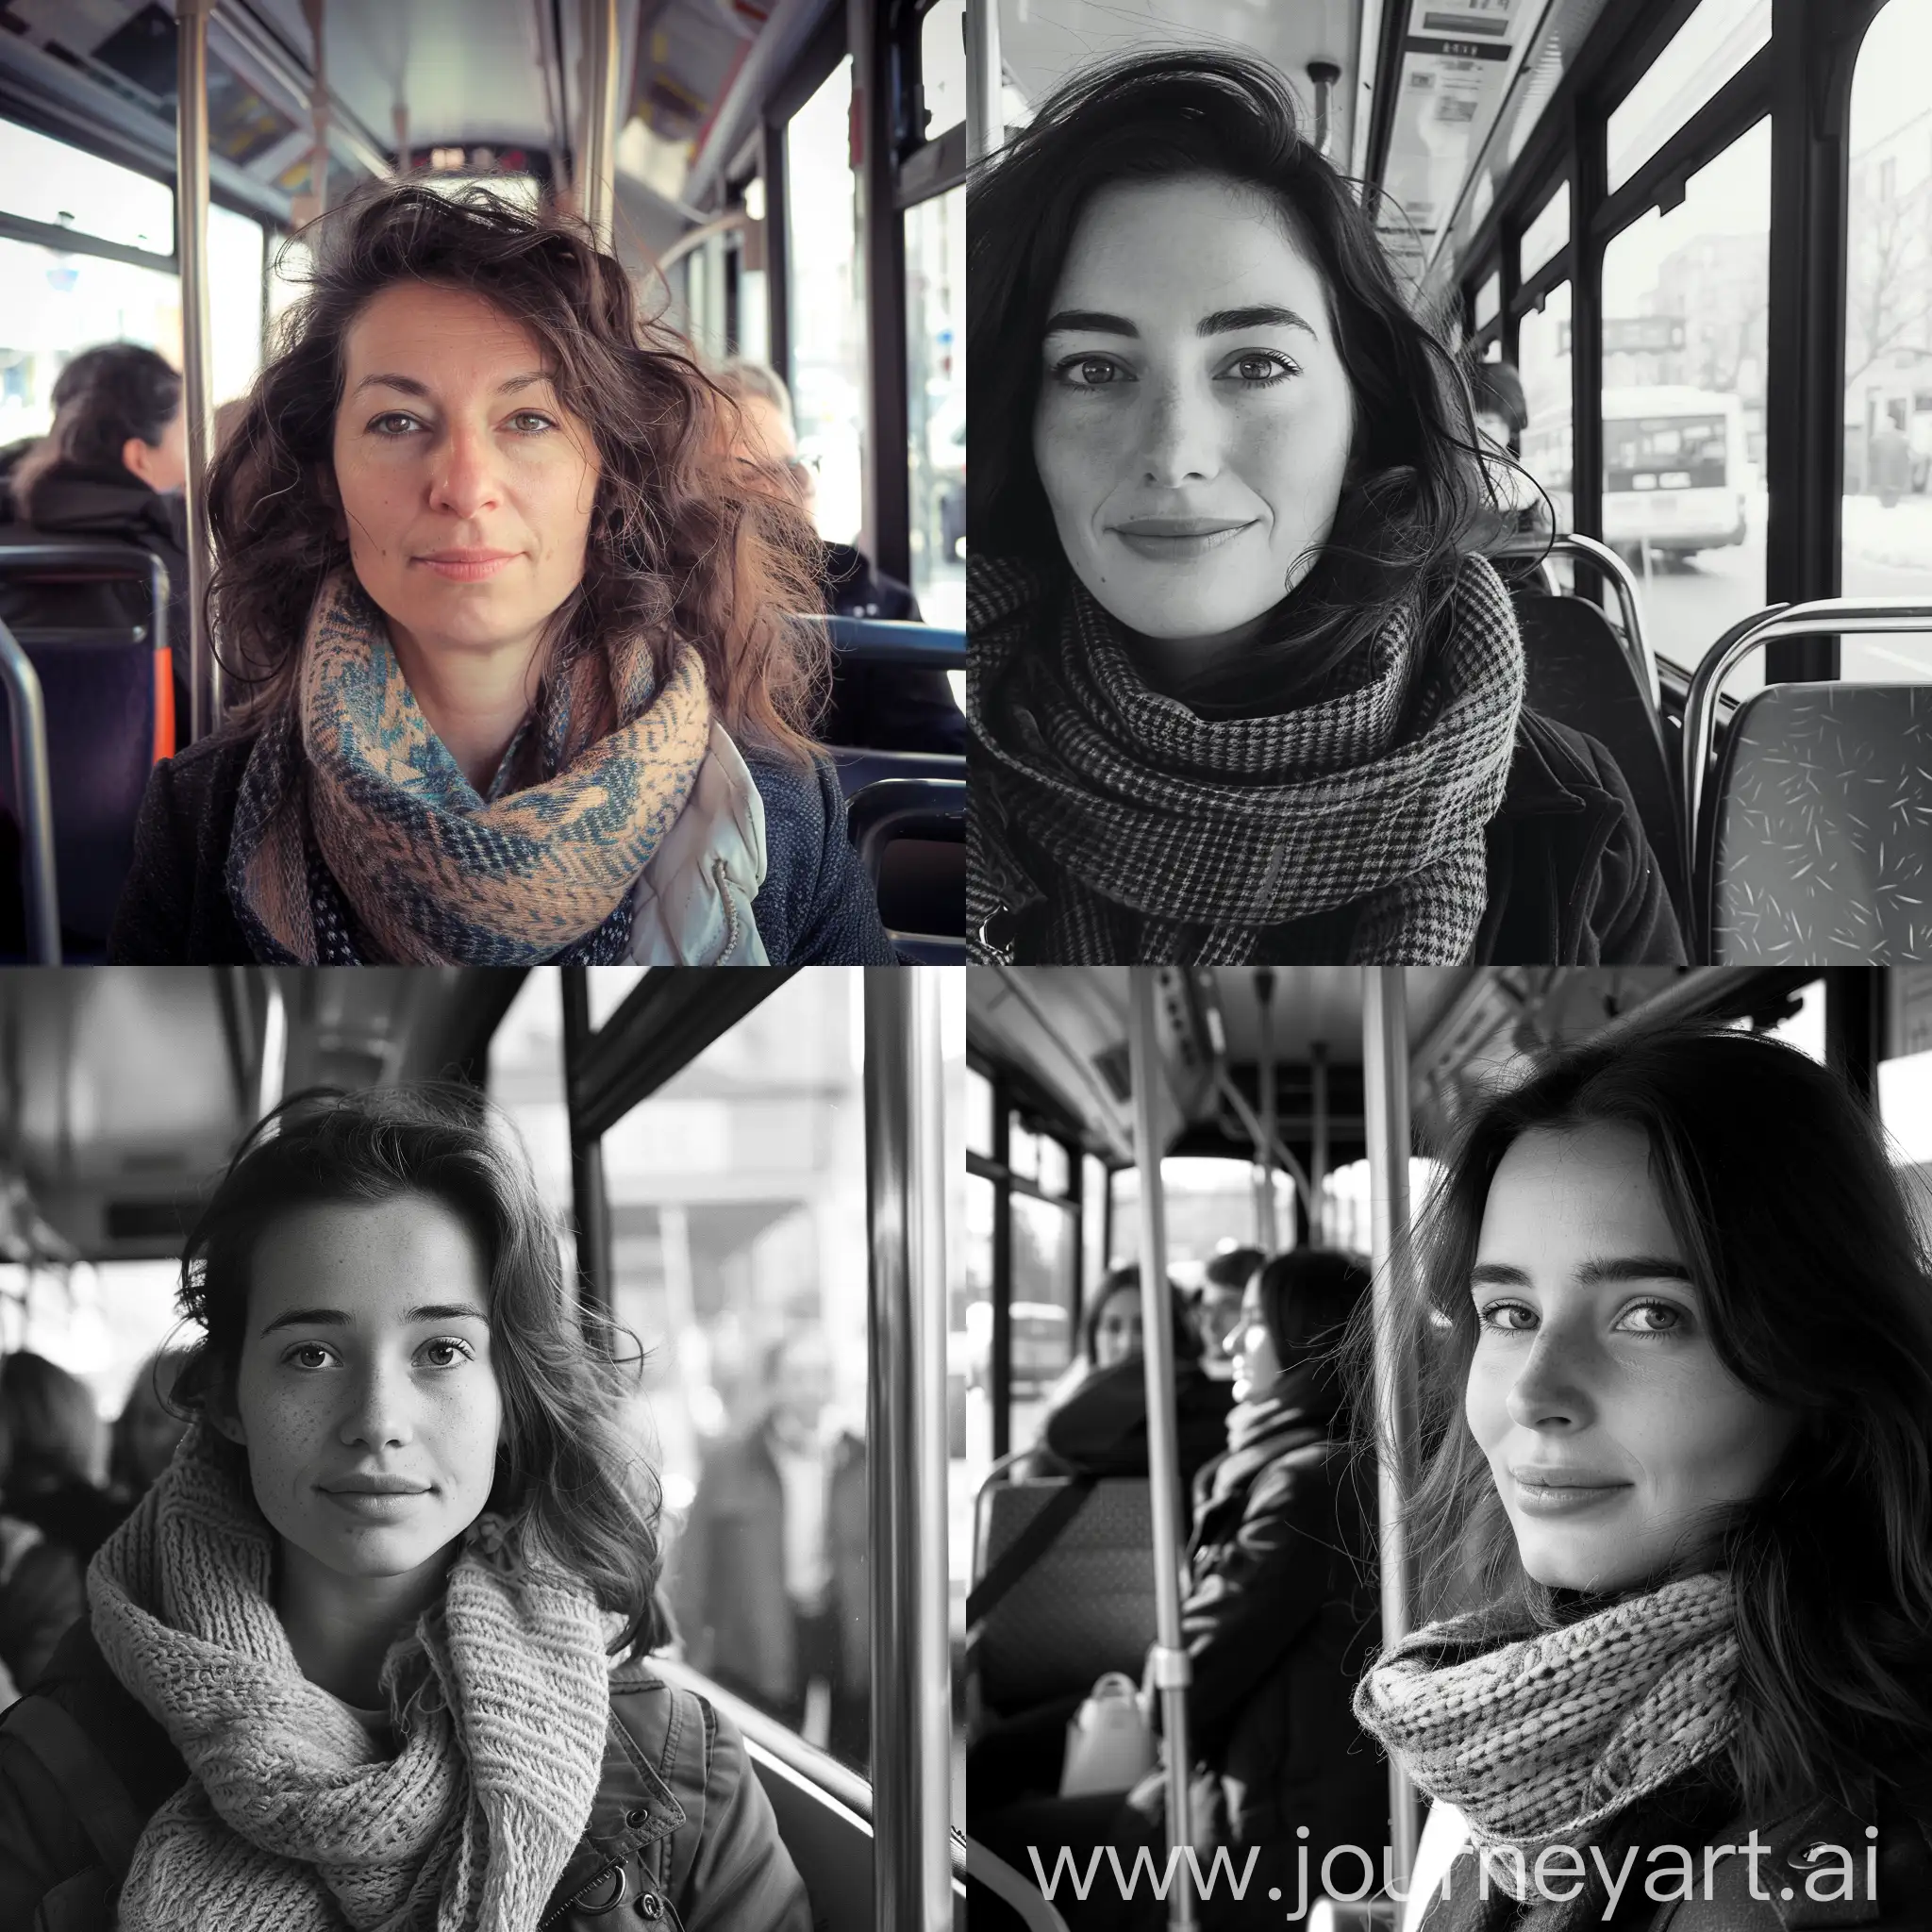 Woman-on-Bus-Sweetly-Looking-at-Camera-with-Scarf